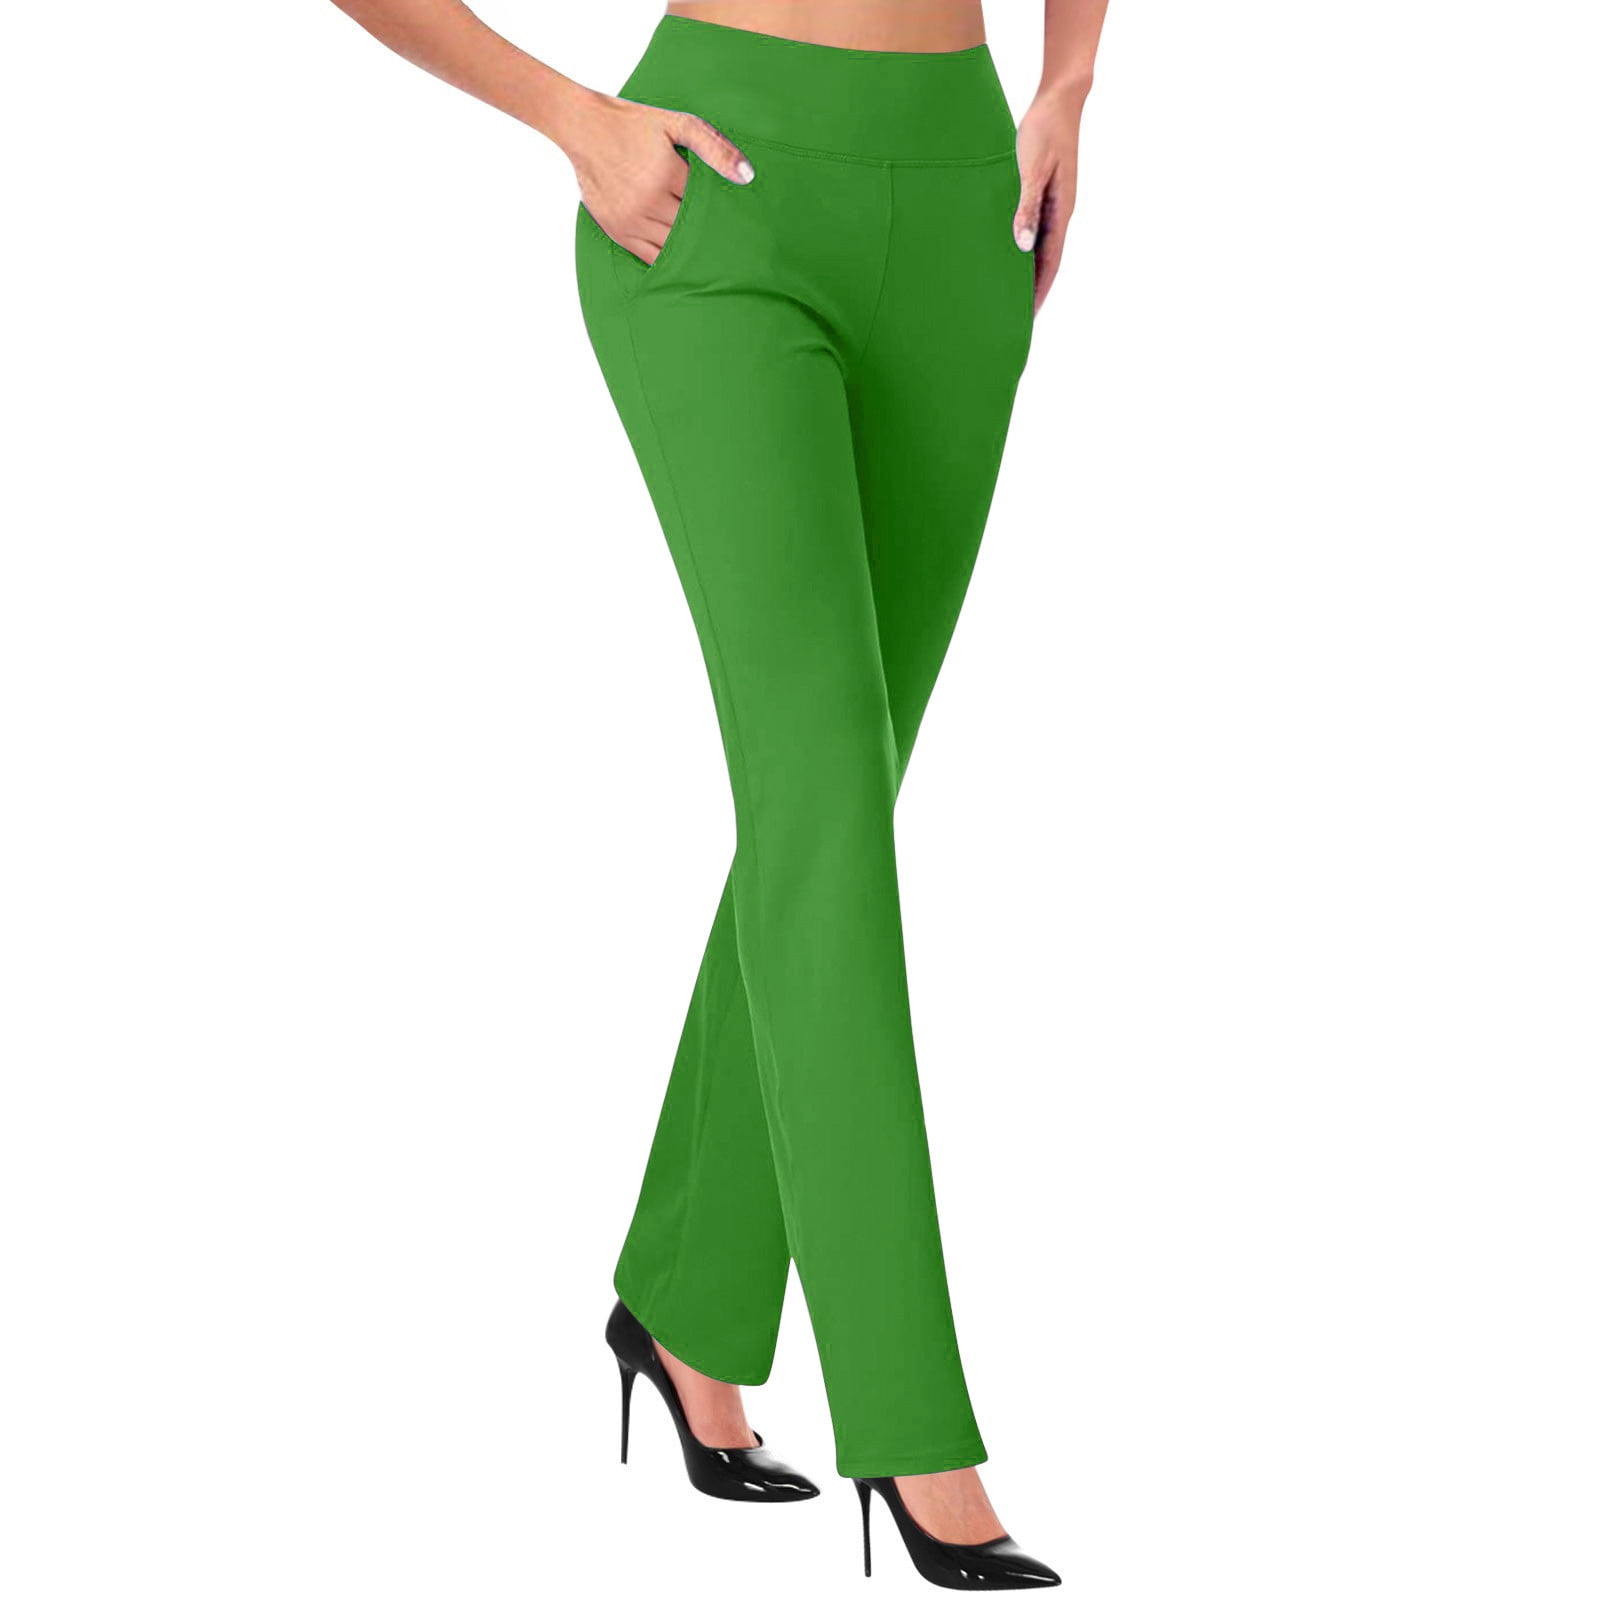 Ginasy Dress Pants for Women Business Casual Stretch Pull On Work Office  Dressy Leggings Skinny Trousers with Pockets Green - Bass River Shoes